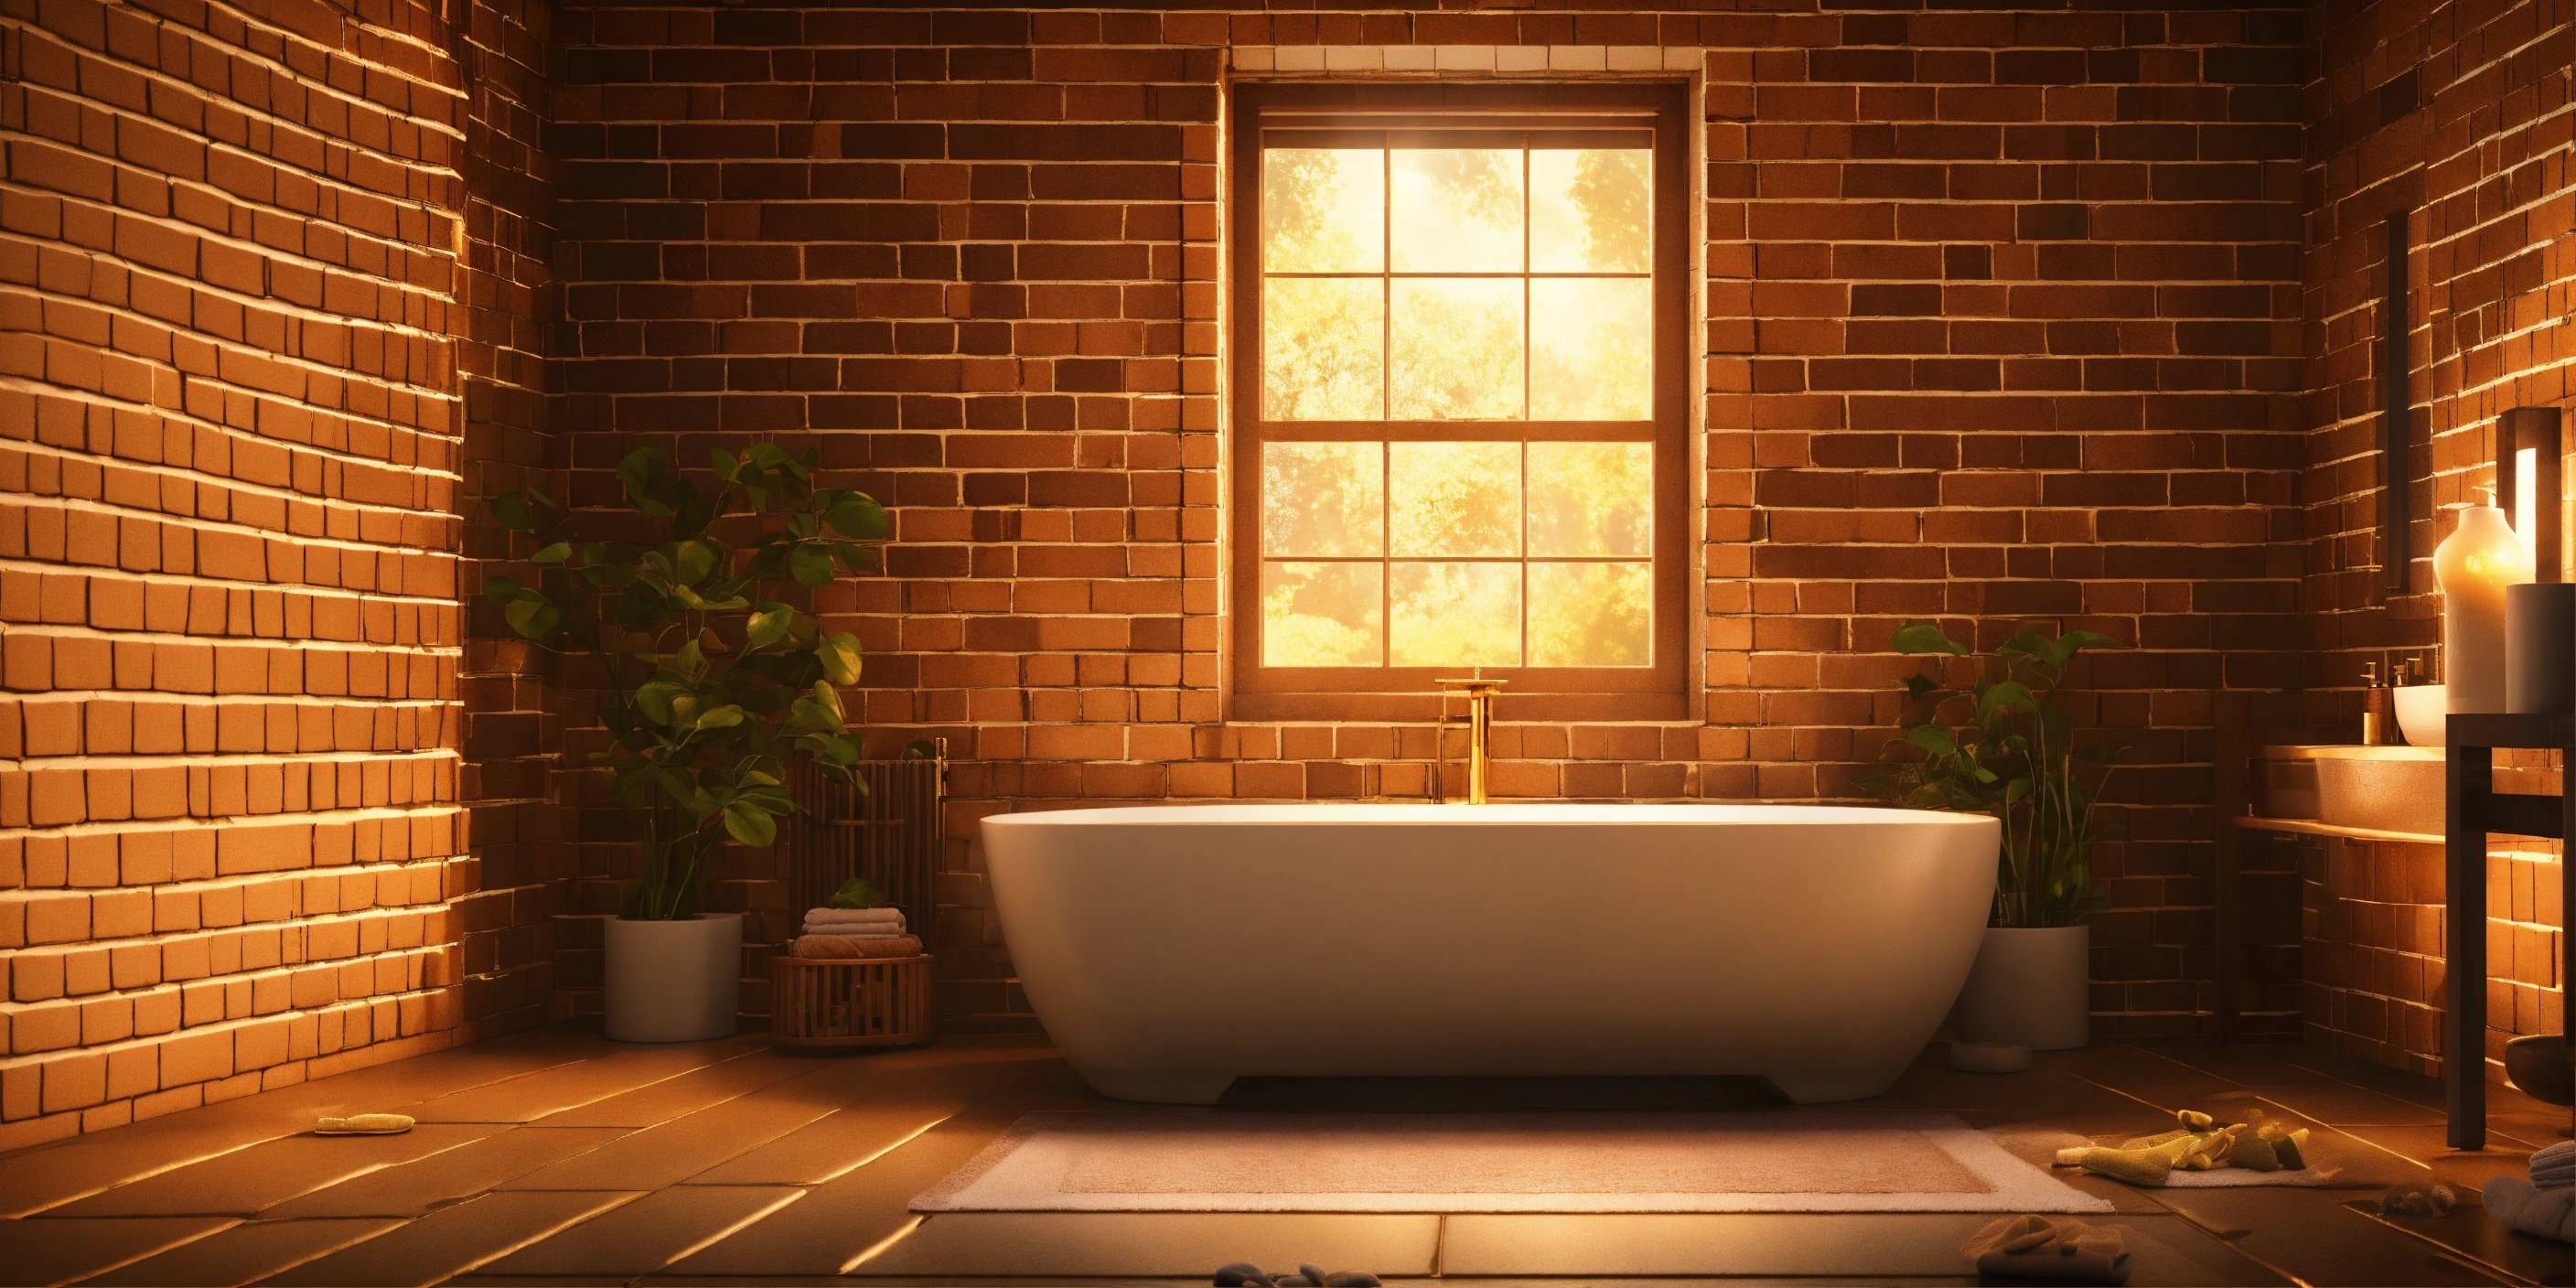 Brick or brick veneer have been making a popular comeback for 2023 bathroom trends. This timeless aesthetic can add a vintage and warm charm to your bathroom space, ideal for creating an atmosphere of relaxation.